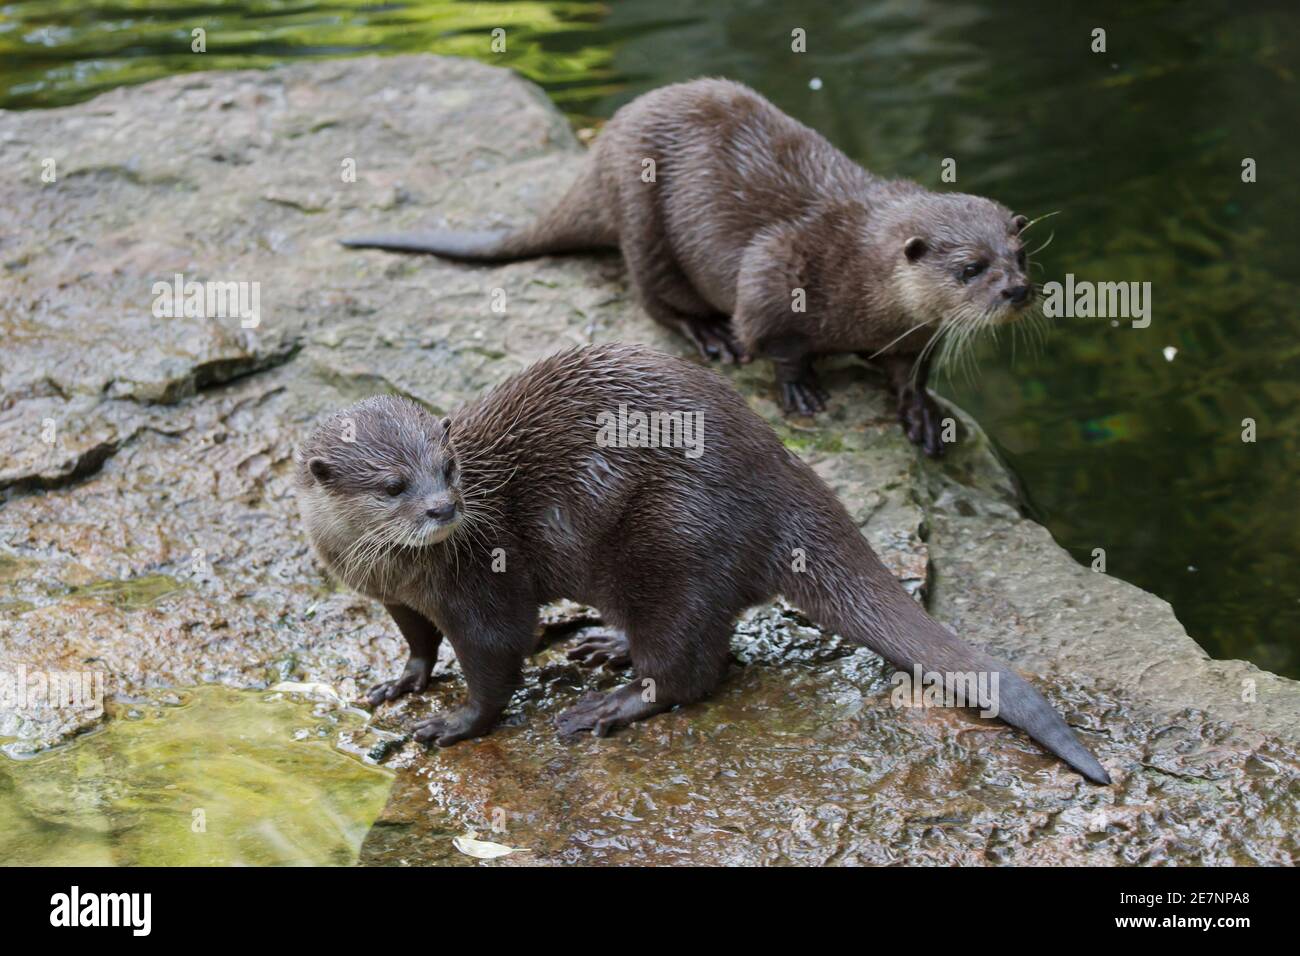 Oriental small-clawed otter (Amblonyx cinereus), also known as the Asian small-clawed otter. Stock Photo